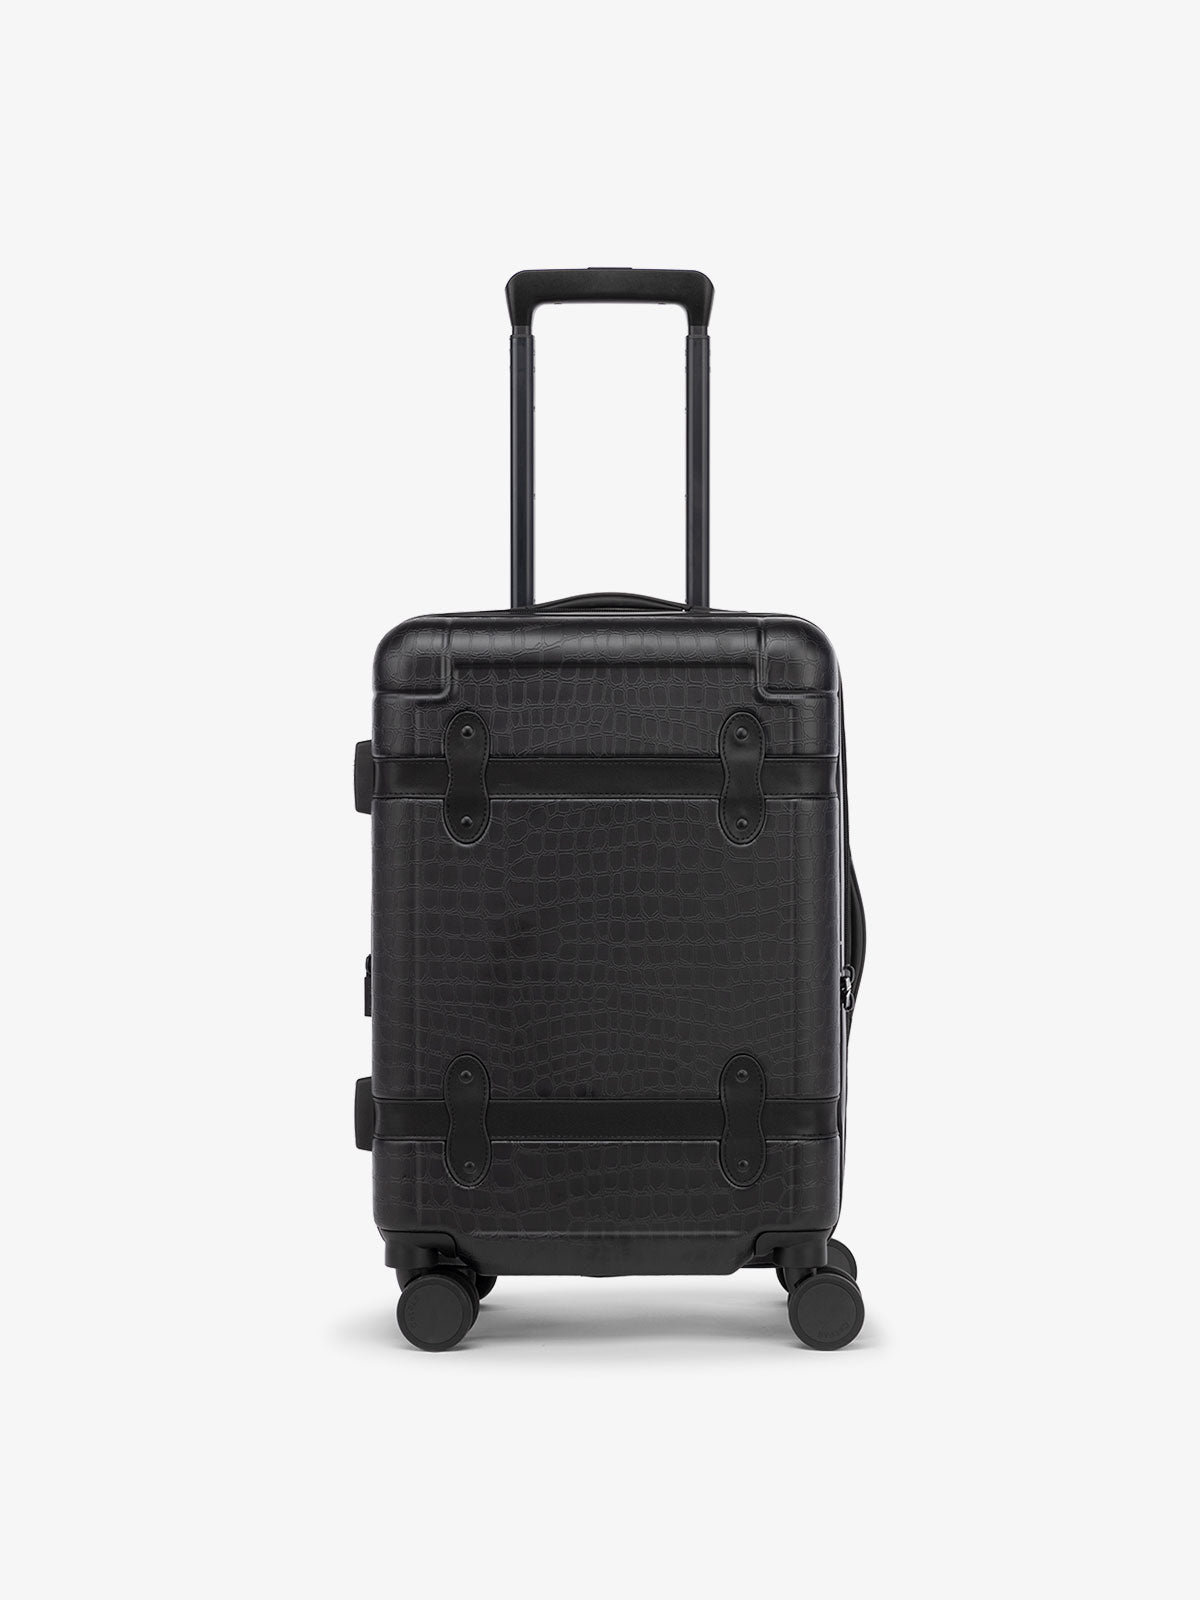 trnk carry-on luggage